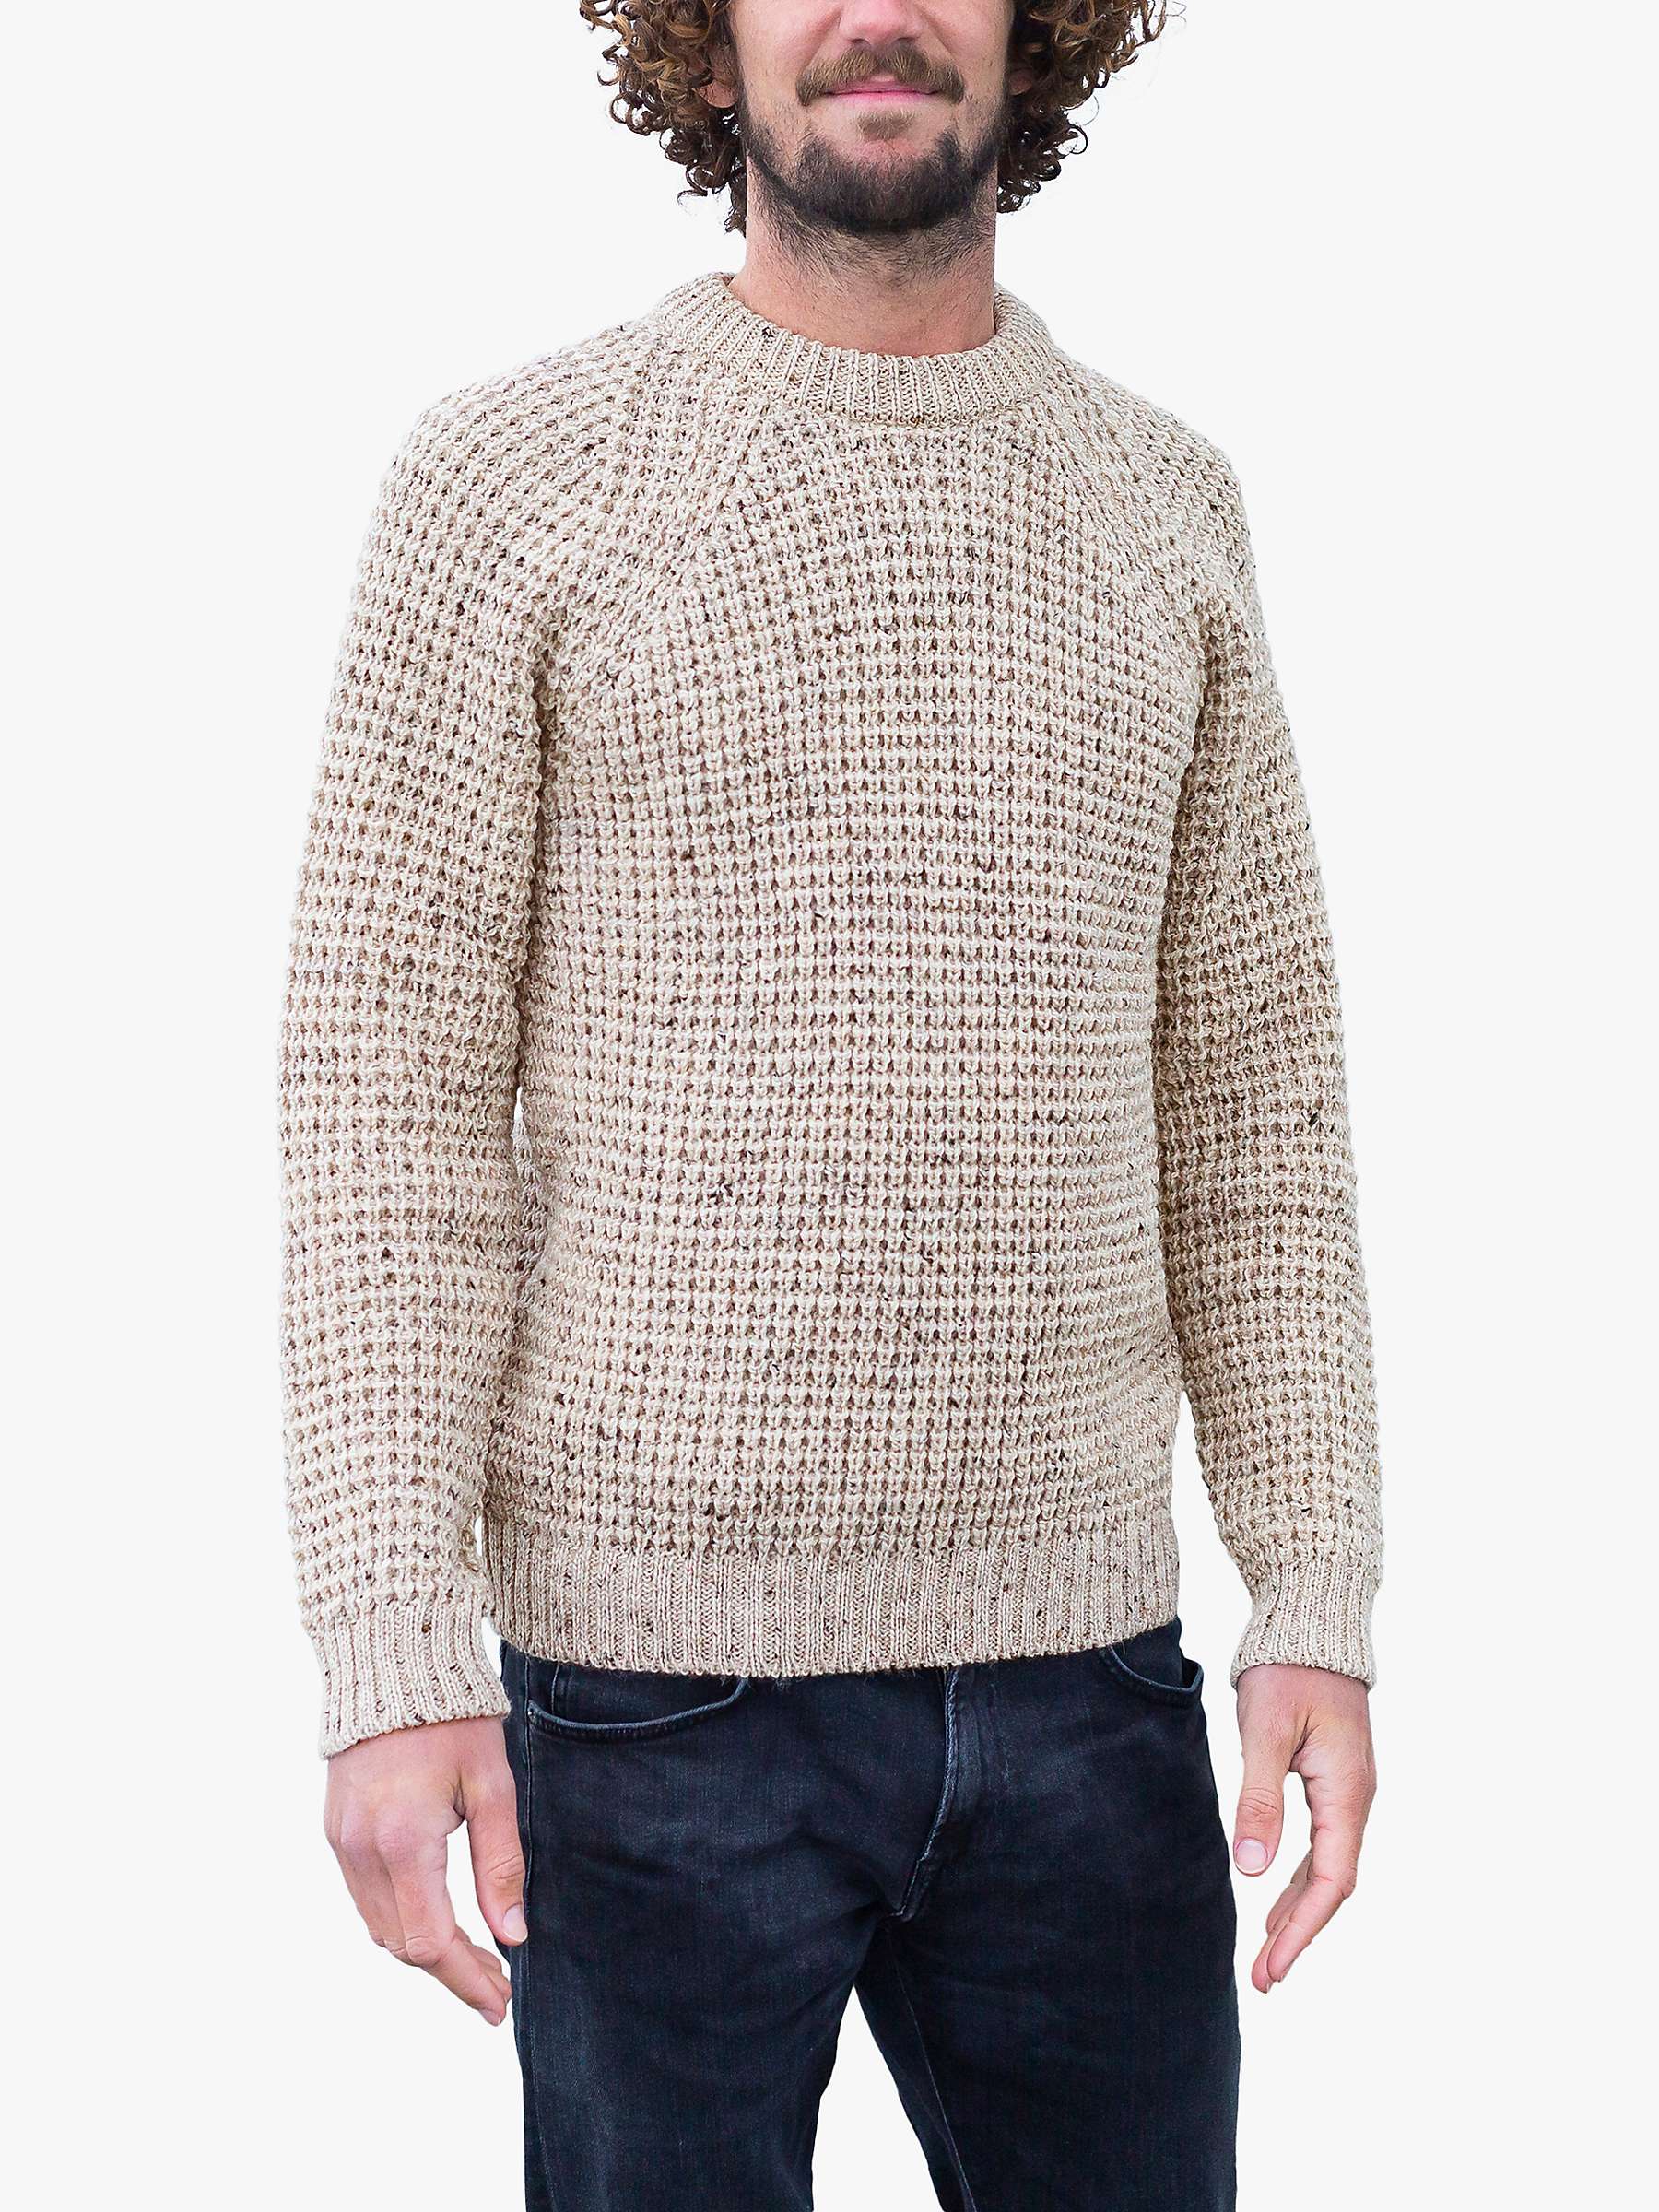 Buy Celtic & Co. Waffle Stitch Crew Jumper, Oatmeal Online at johnlewis.com